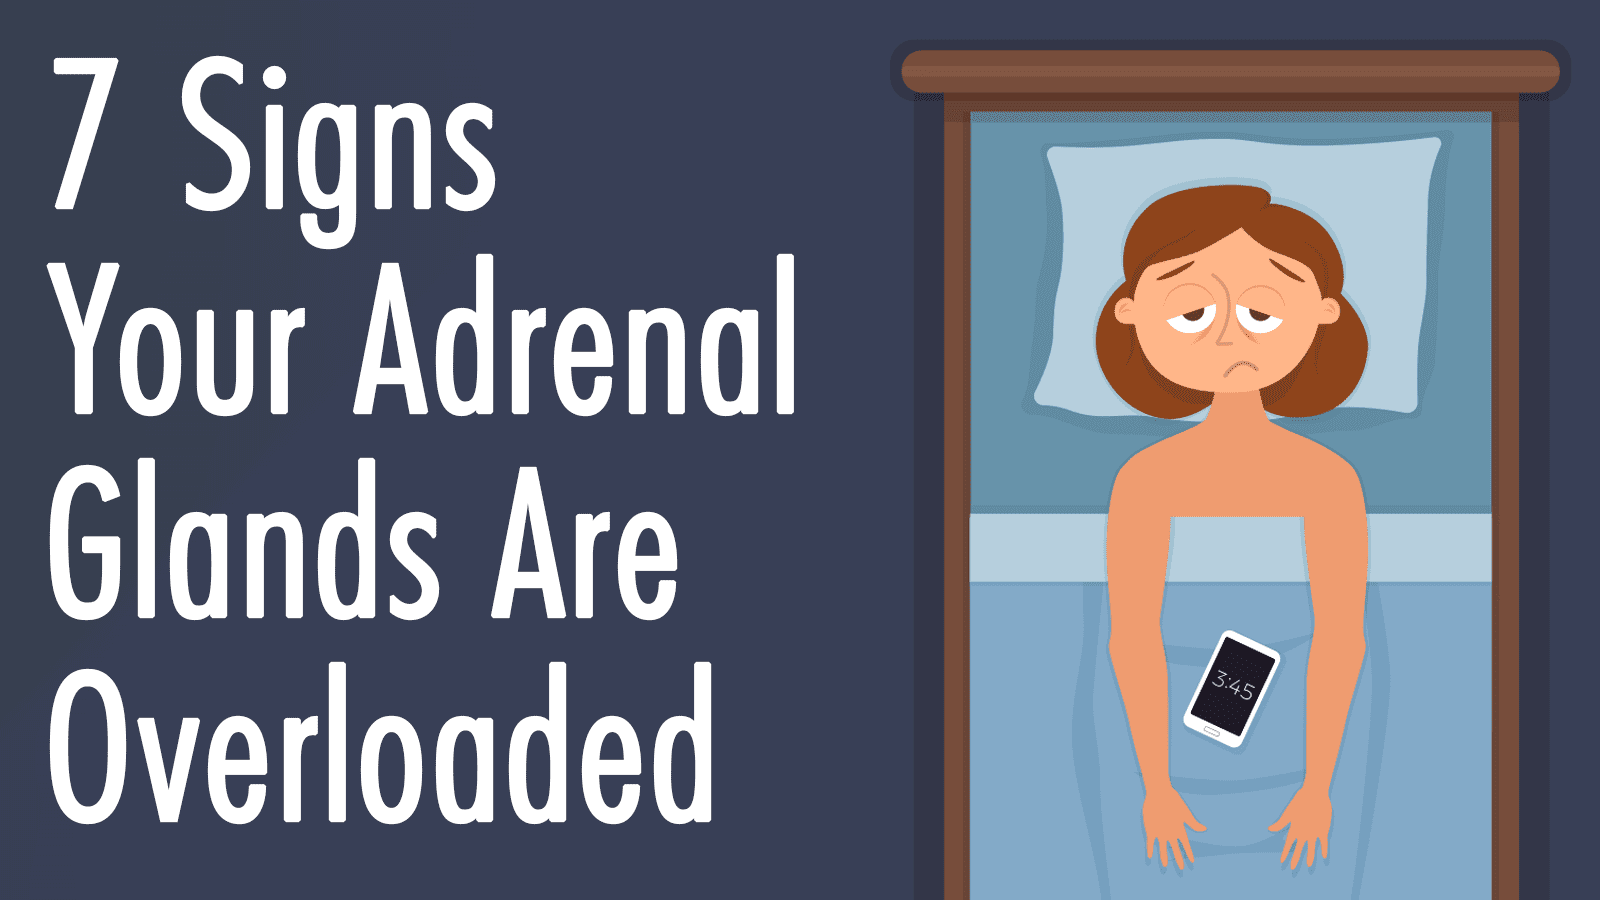 7 Signs Your Adrenal Glands Are Overloaded